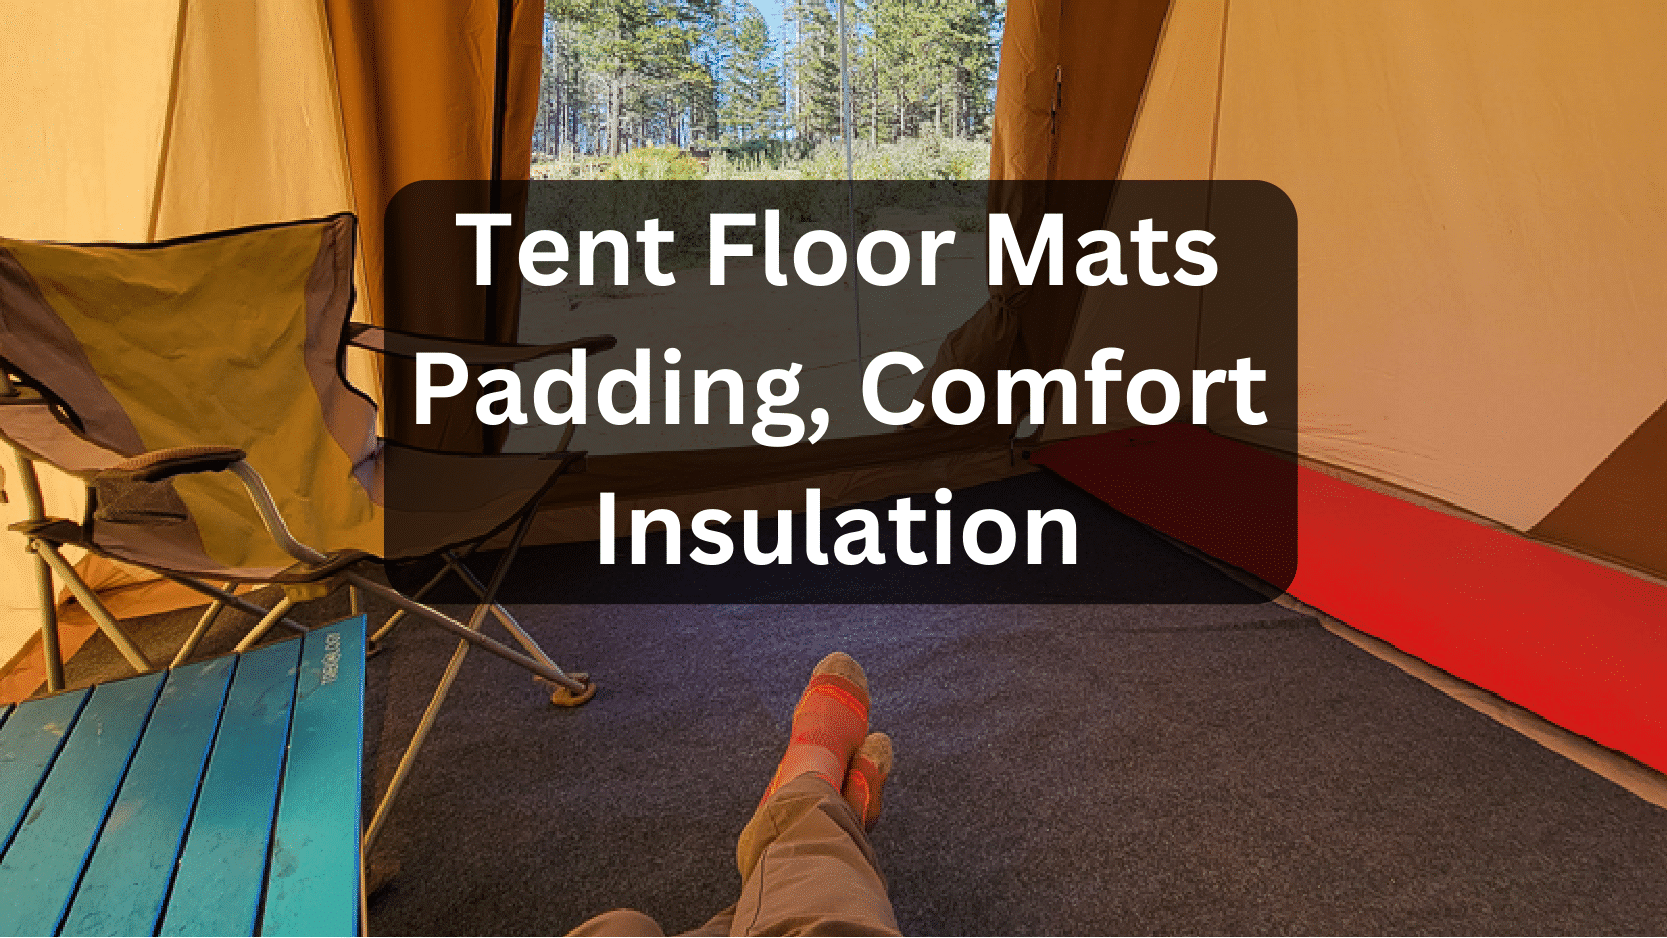 Best Tent Floor Mats: Padding for Comfort and Insulation